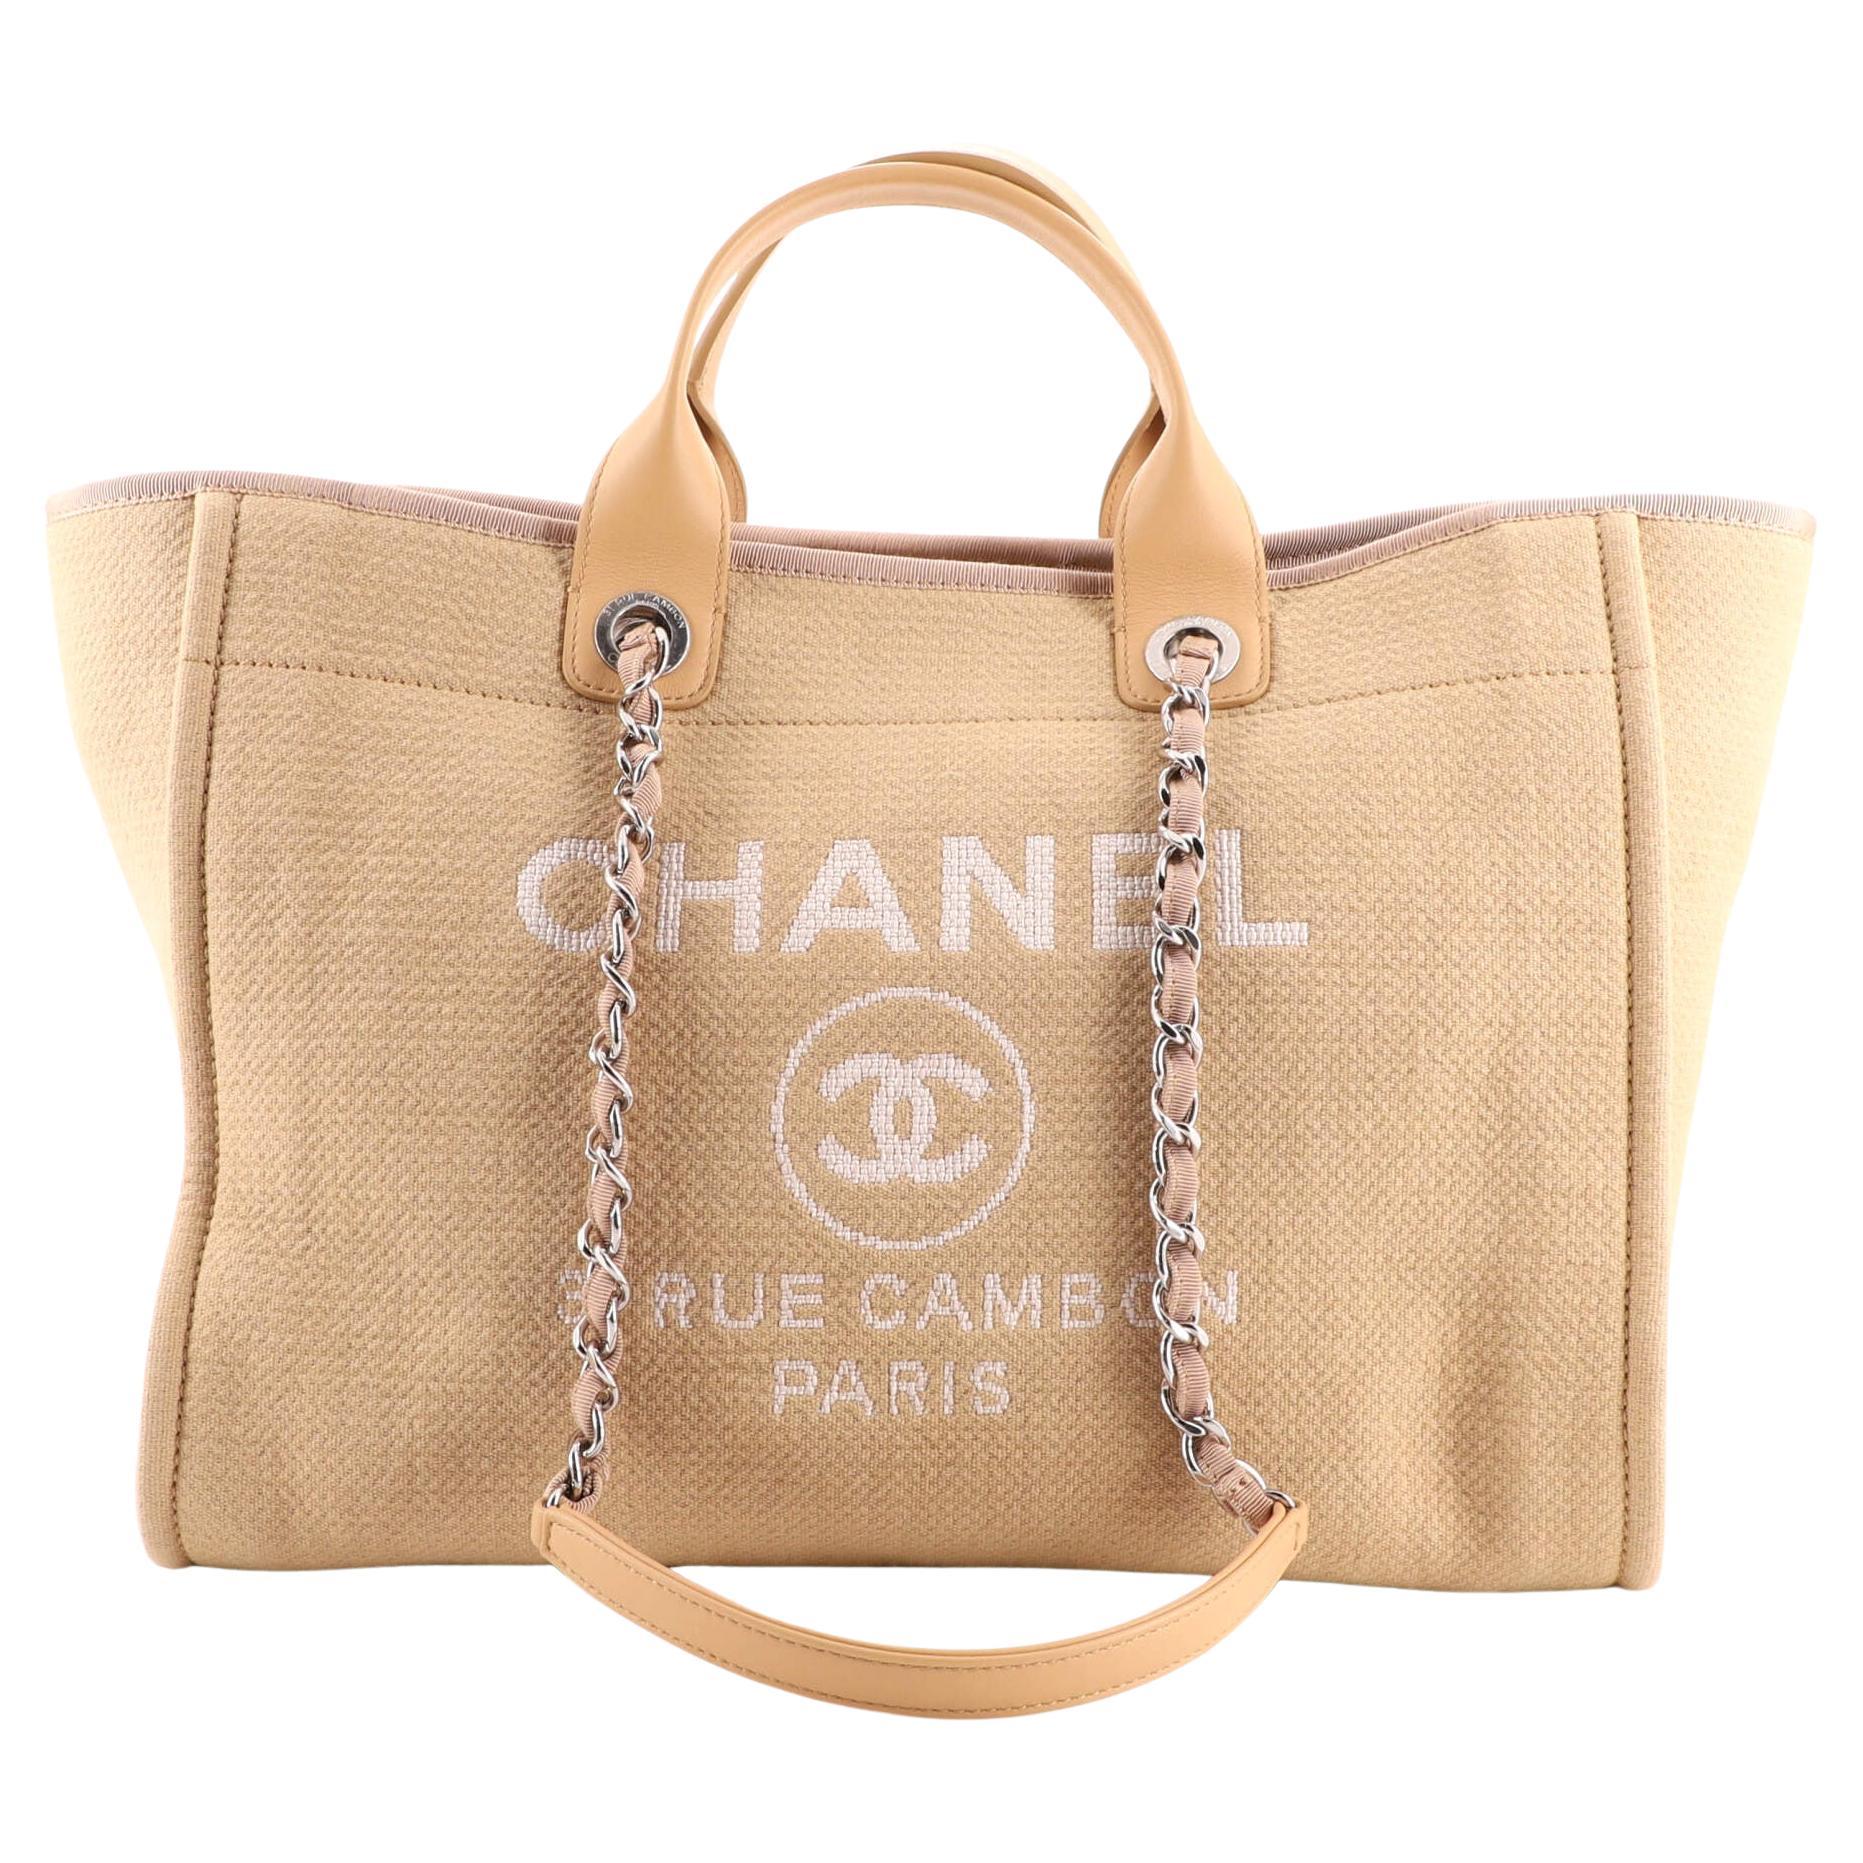 Chanel Deauville NM Tote Mixed Fibers Medium